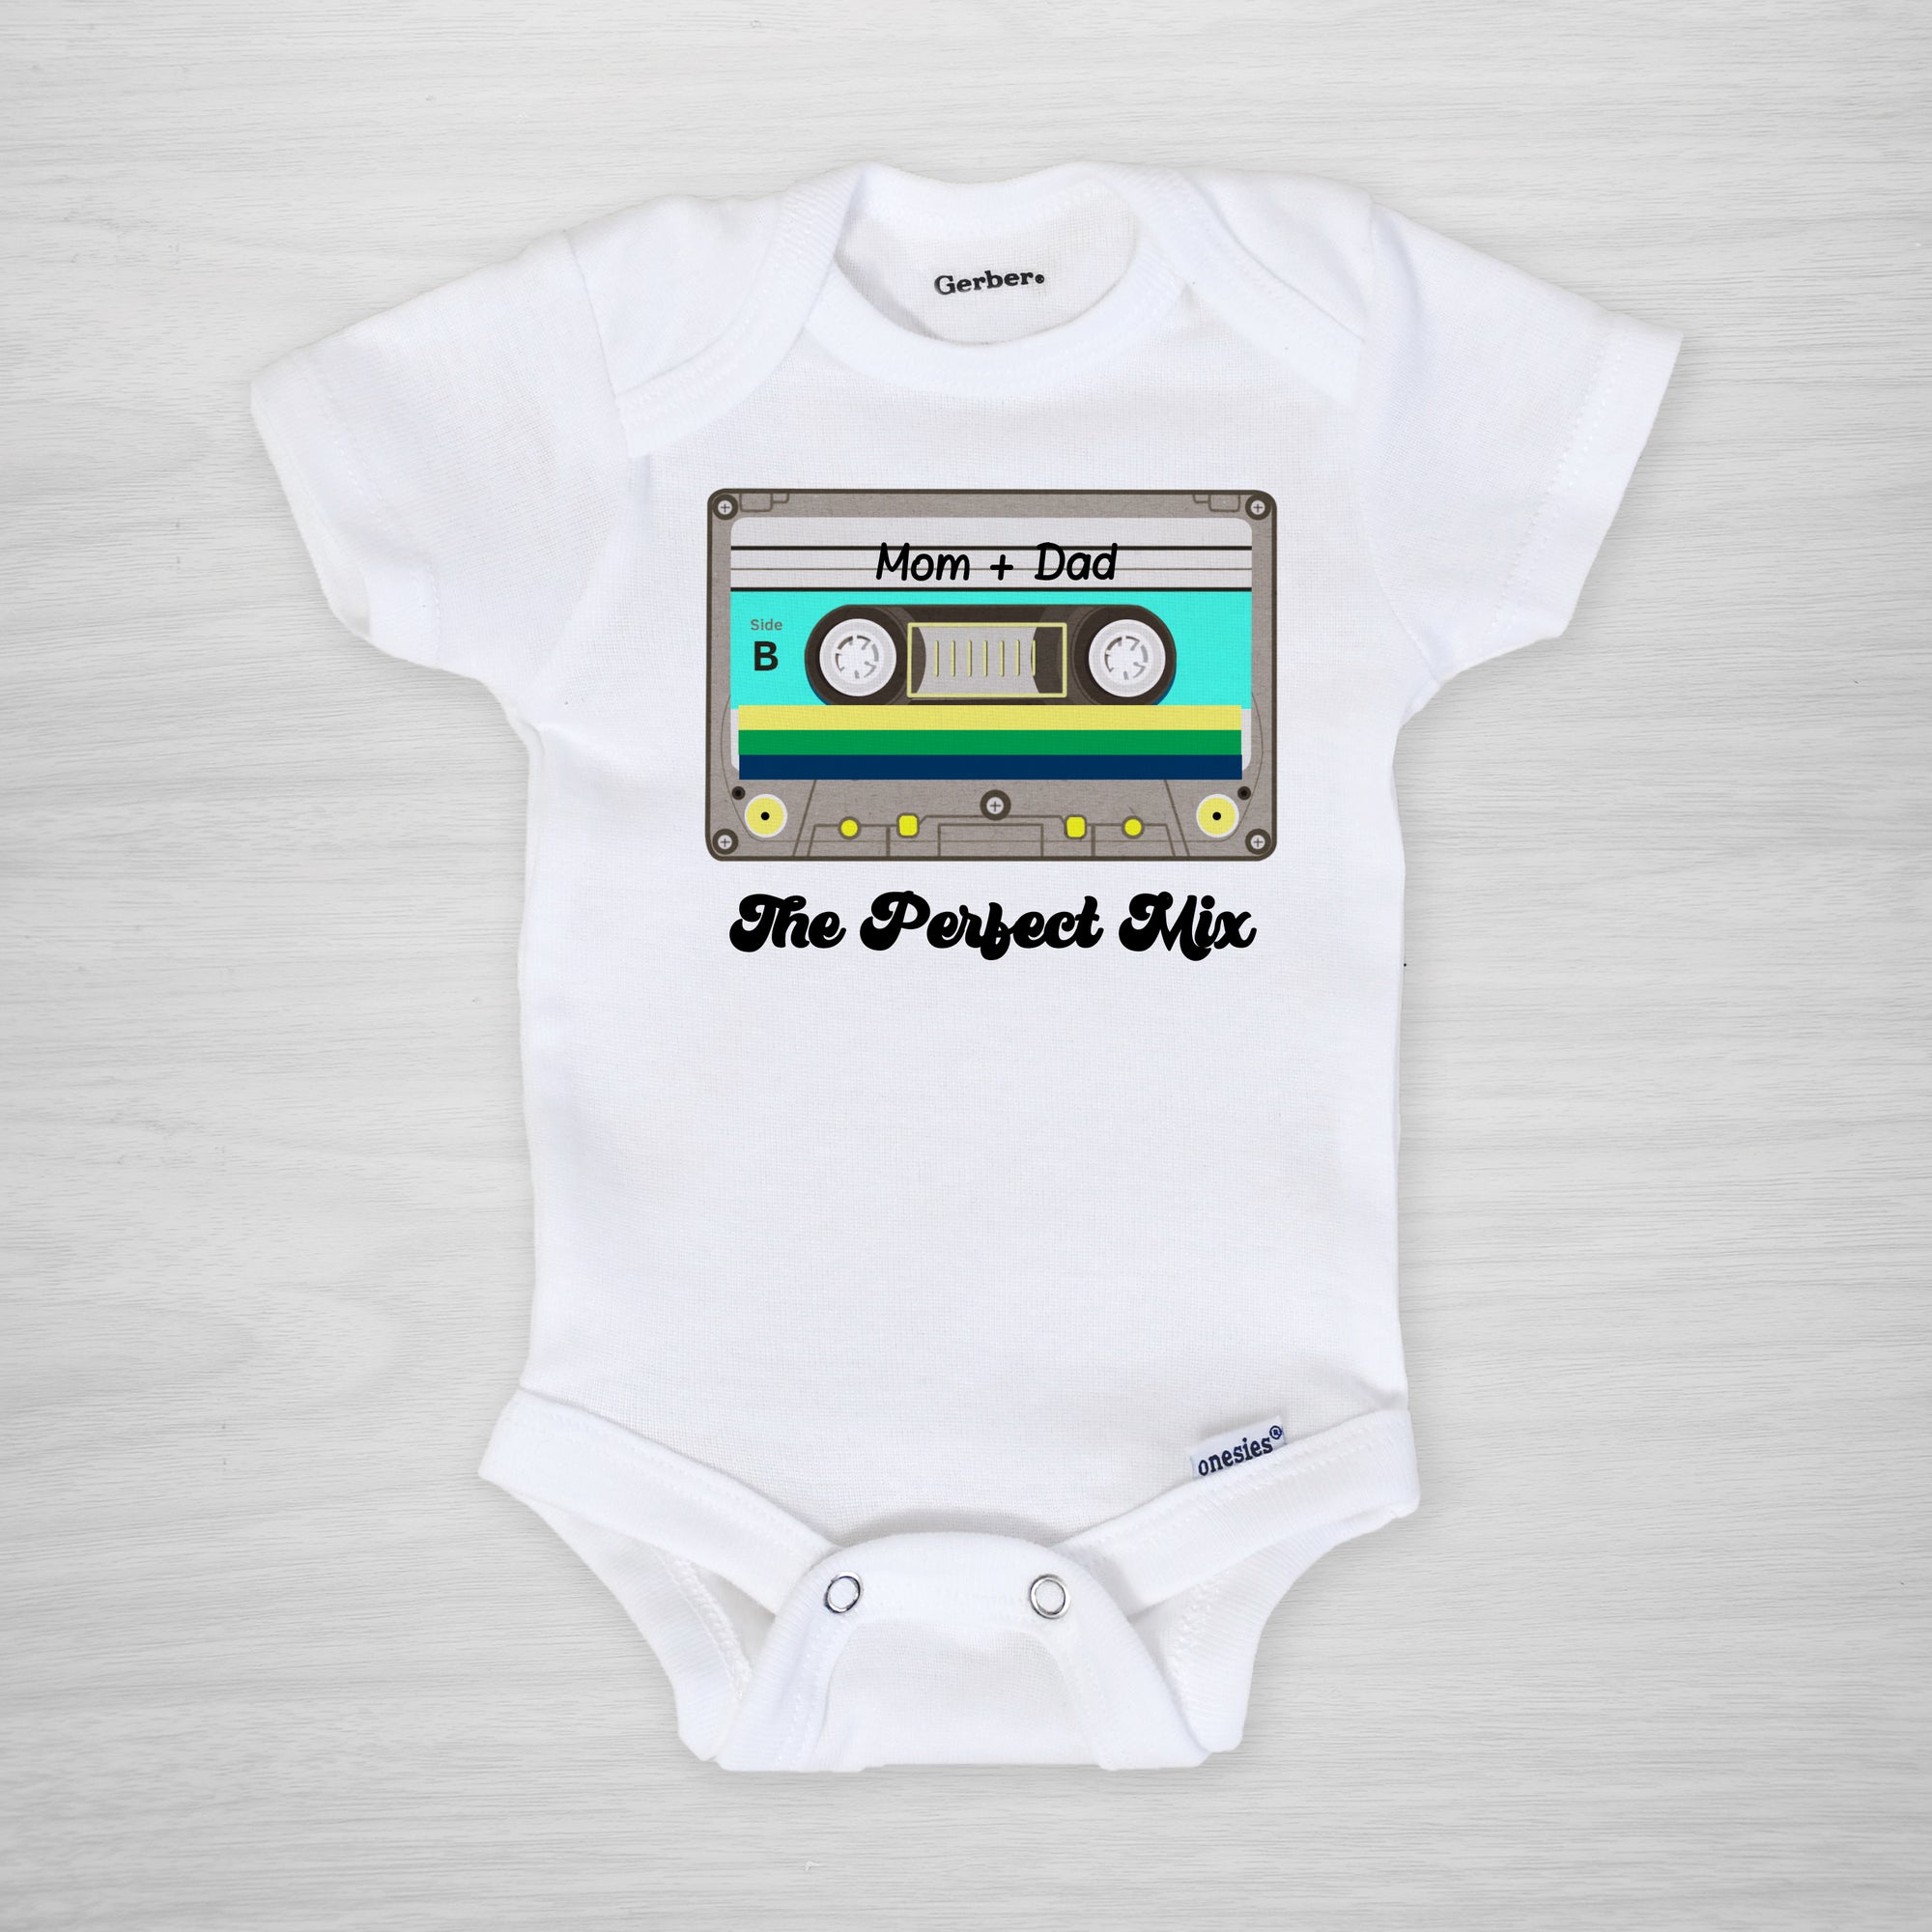 The Perfect Mix Onesie, featuring a retro 80s cassette mix tape with "mom + dad" written on it, custom printed in our Nashville studio on genuine Gerber Onesies, long sleeved